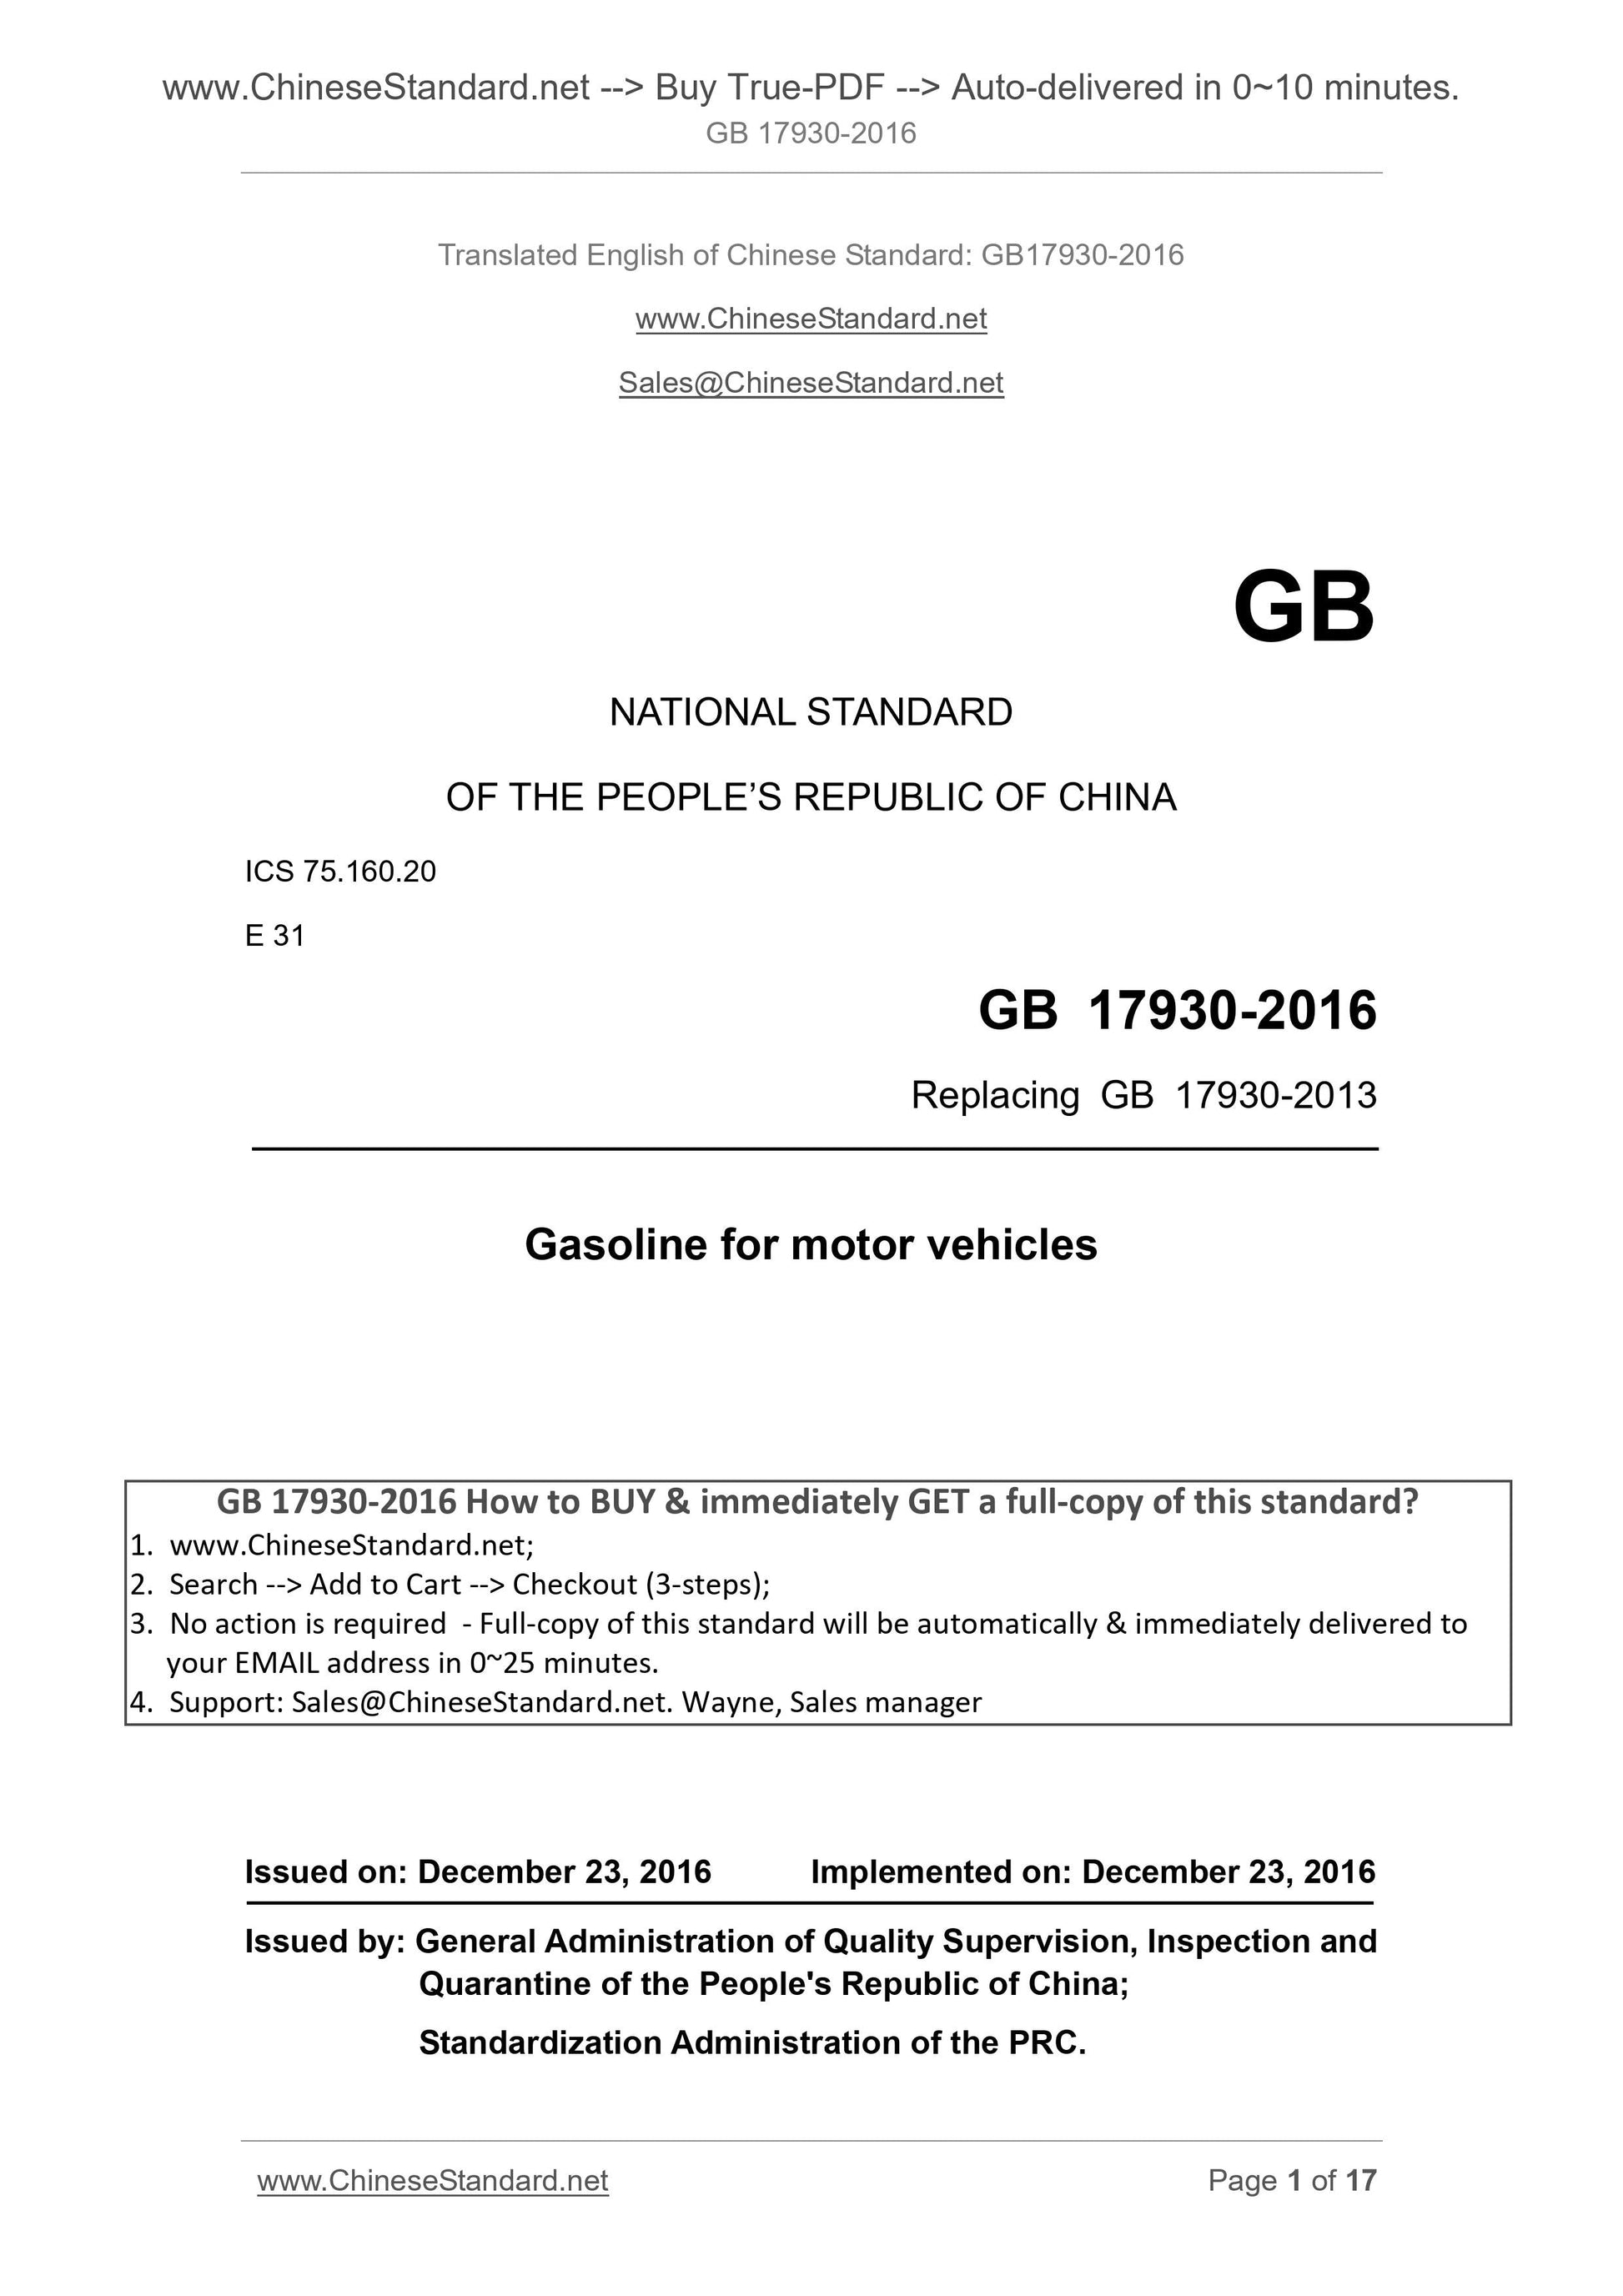 GB 17930-2016 Page 1